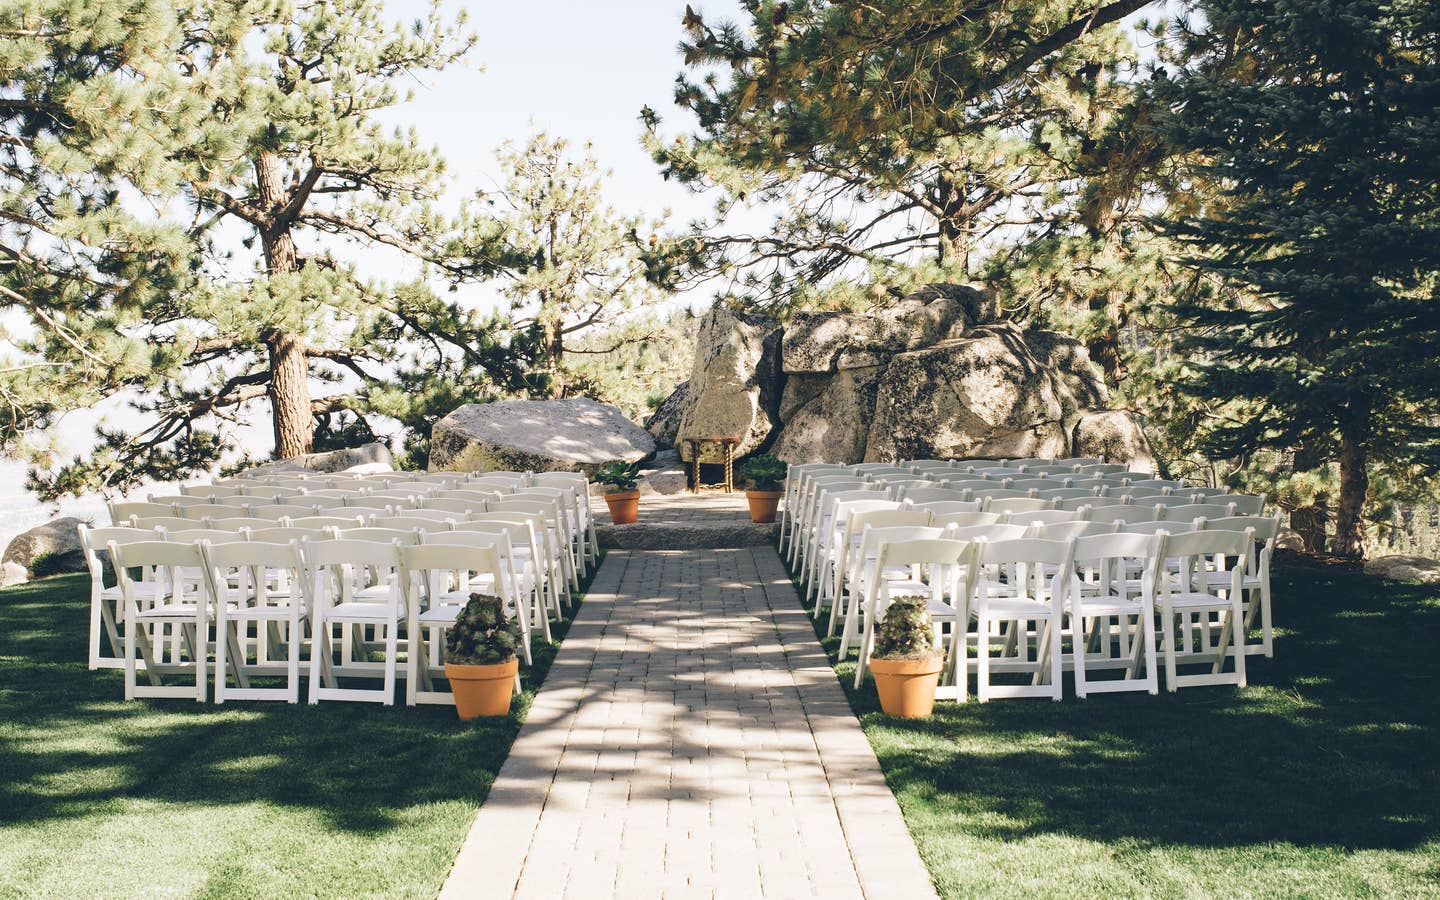 White chairs set up for a wedding ceremony